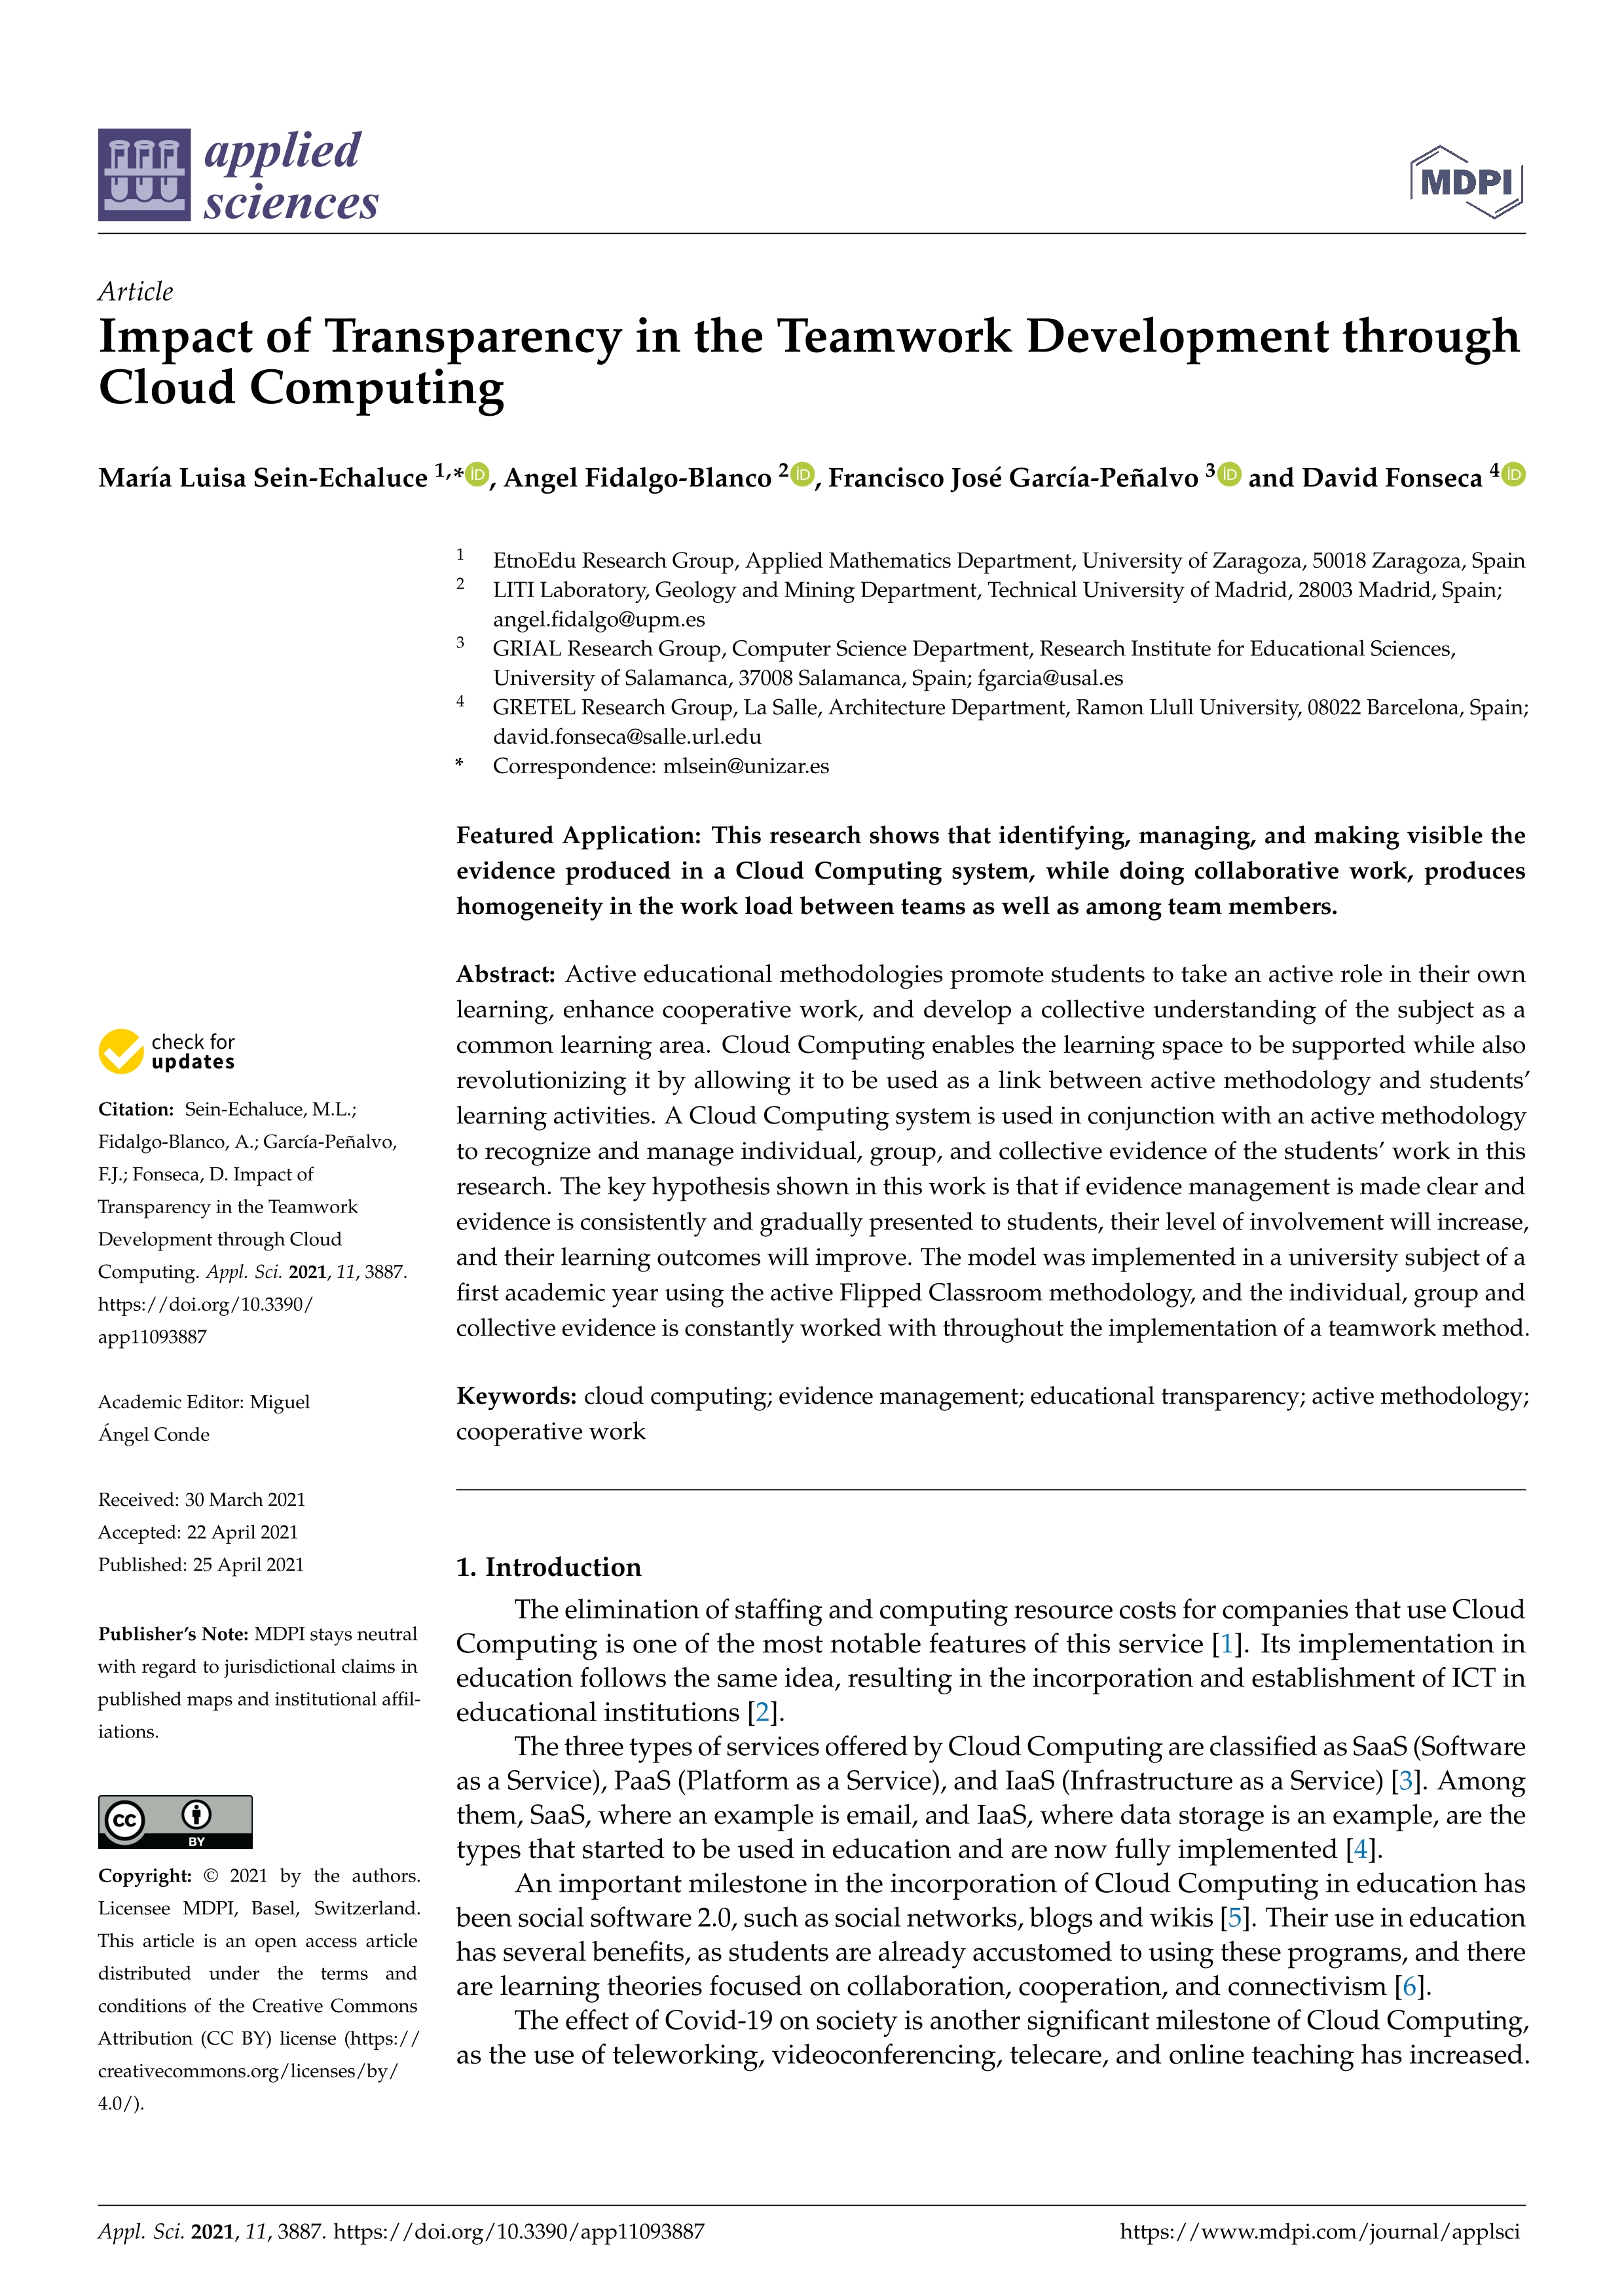 Impact of transparency in the teamwork development through cloud computing